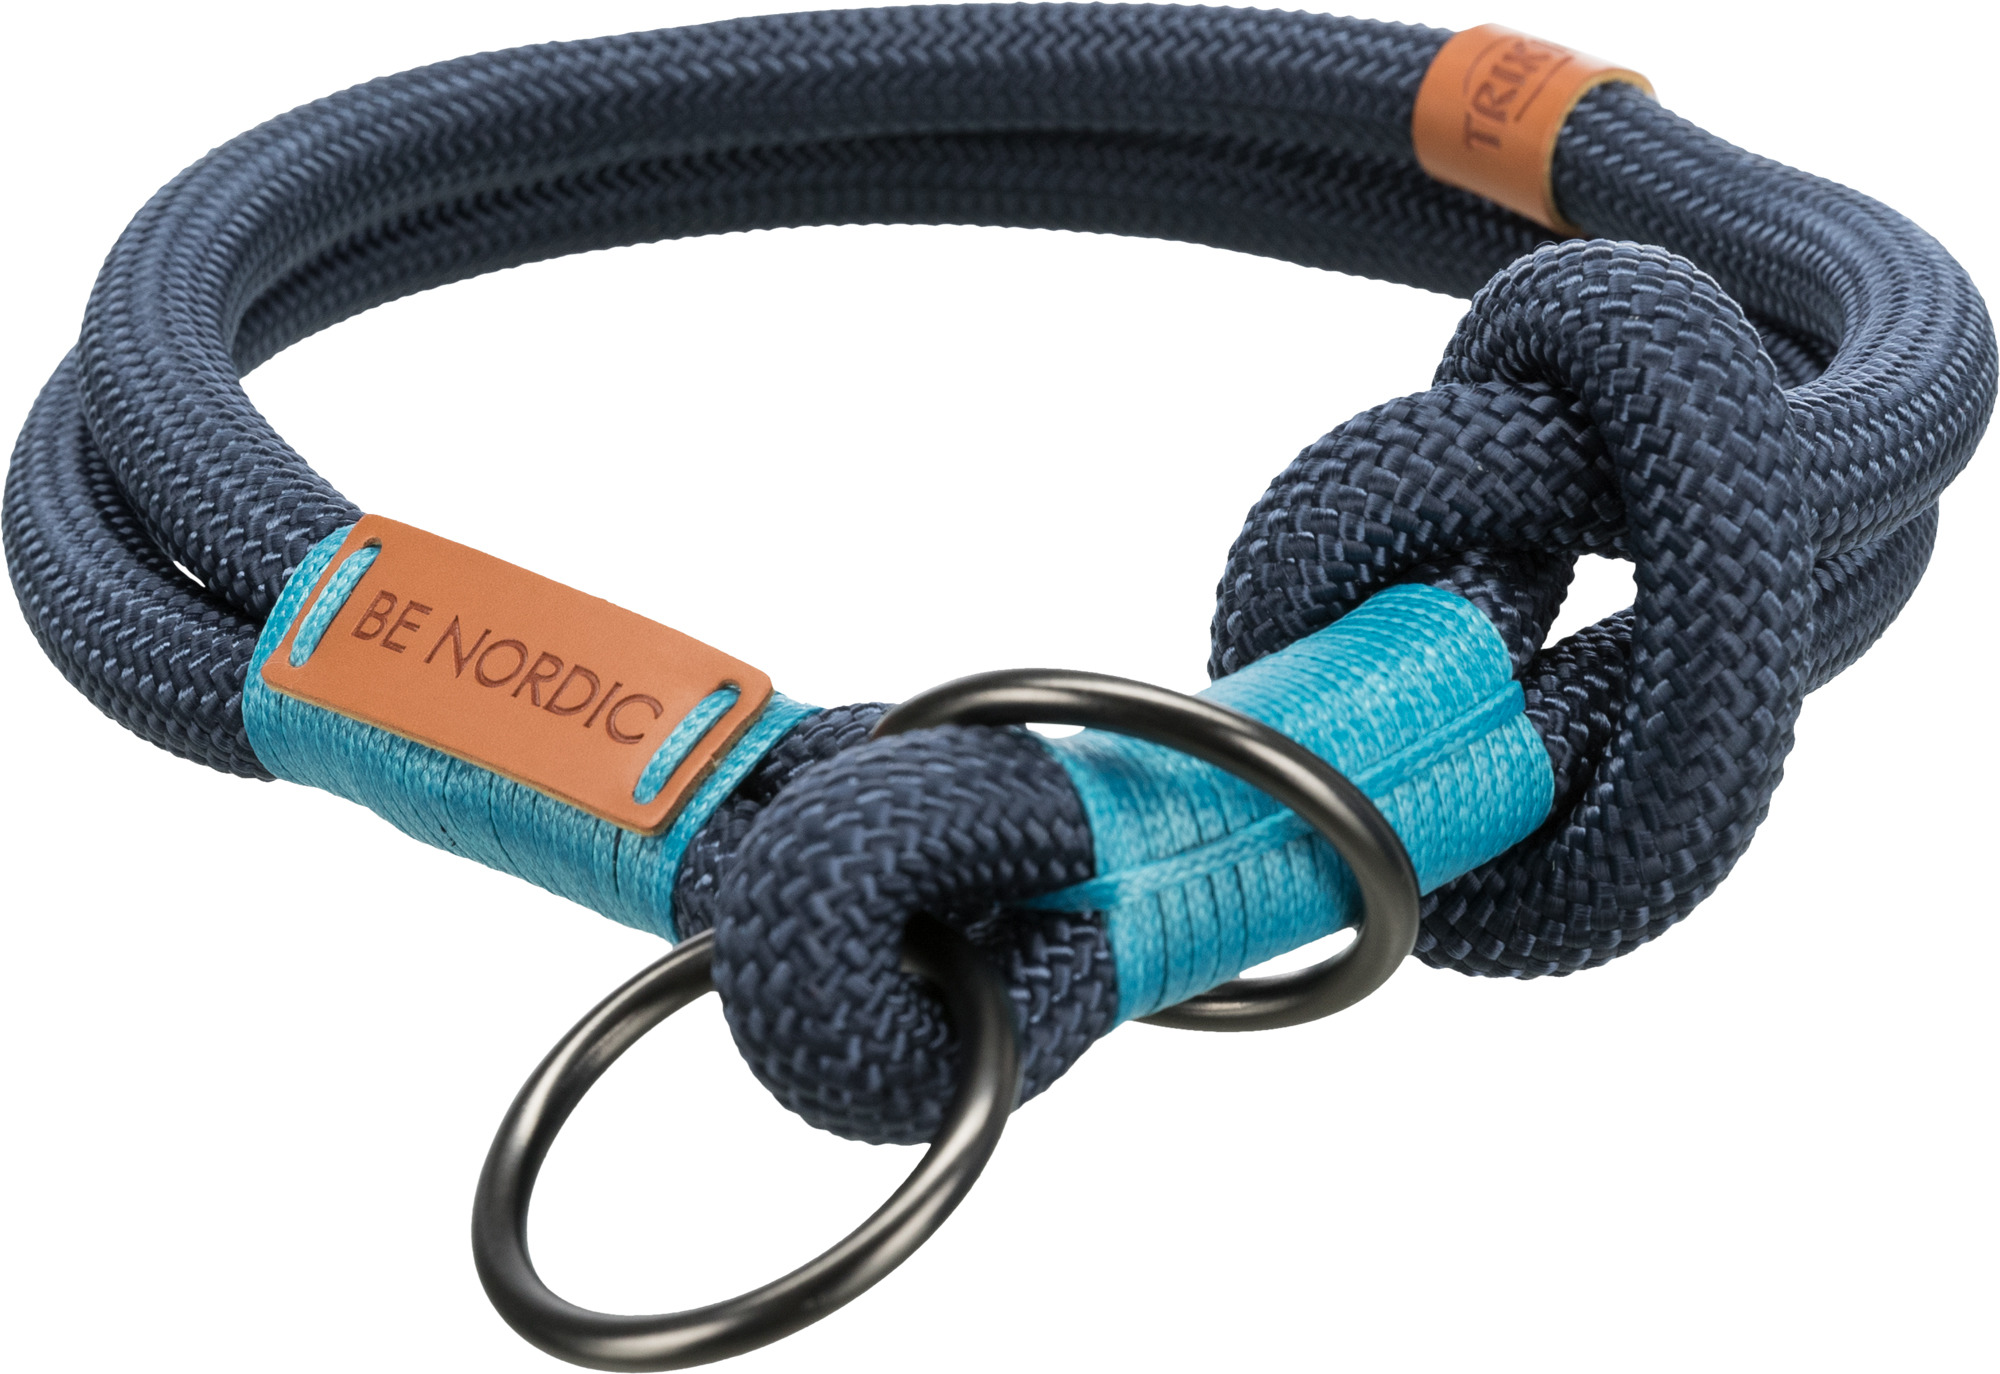 TRIXIE BE NORDIC Zug-Stopp-Halsband TRIXIE BE NORDIC Zug-Stopp-Halsband, S: 35 cm/ø 6 mm, dunkelblau/hellblau